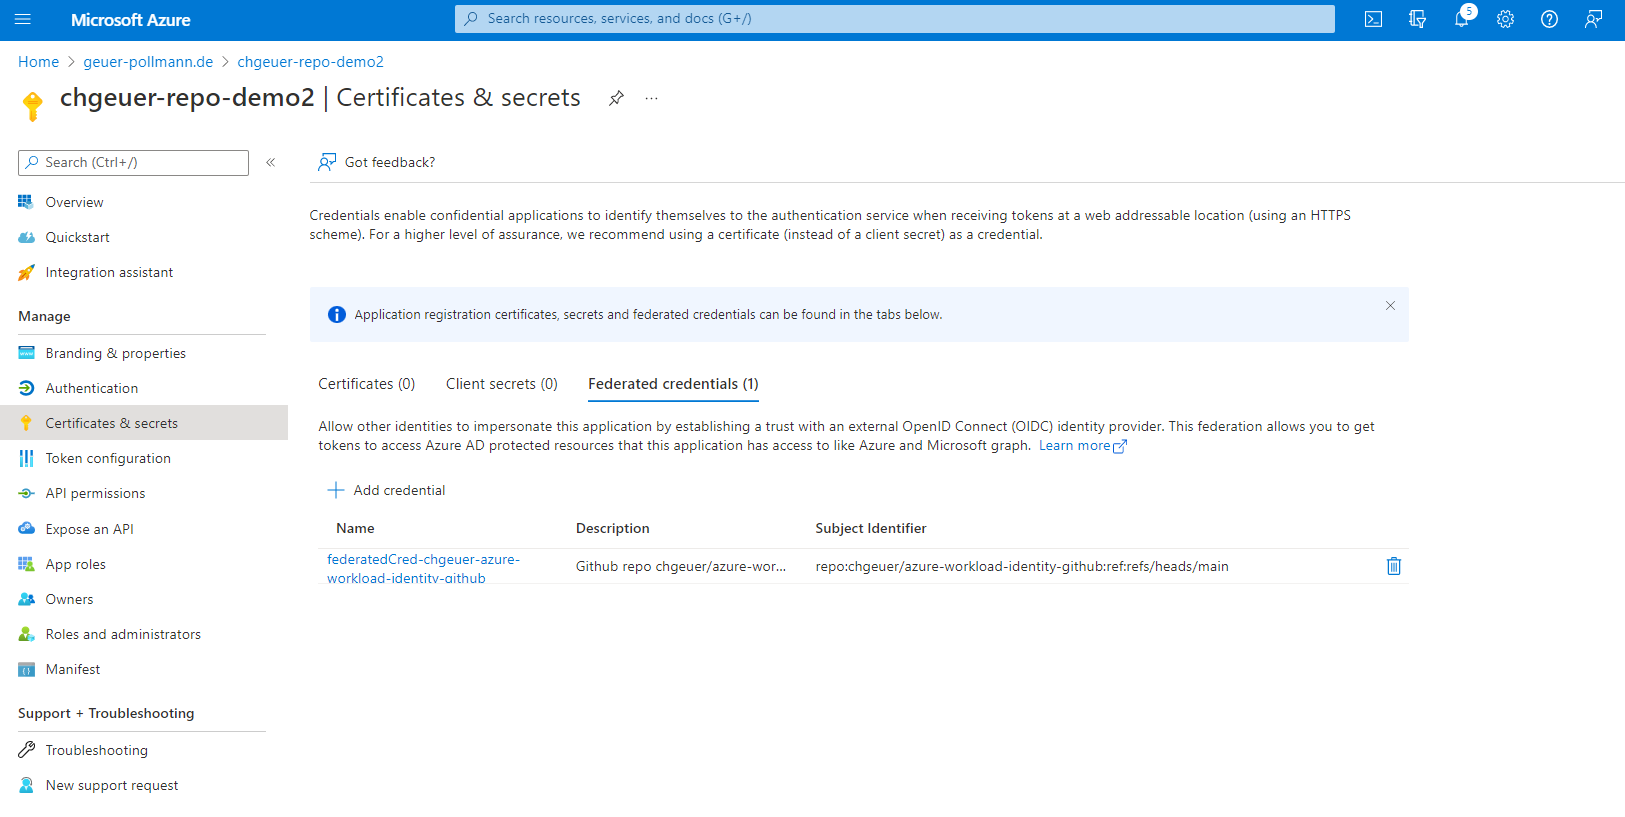 sceenshot-azure-ad-federated-credential-overview.png